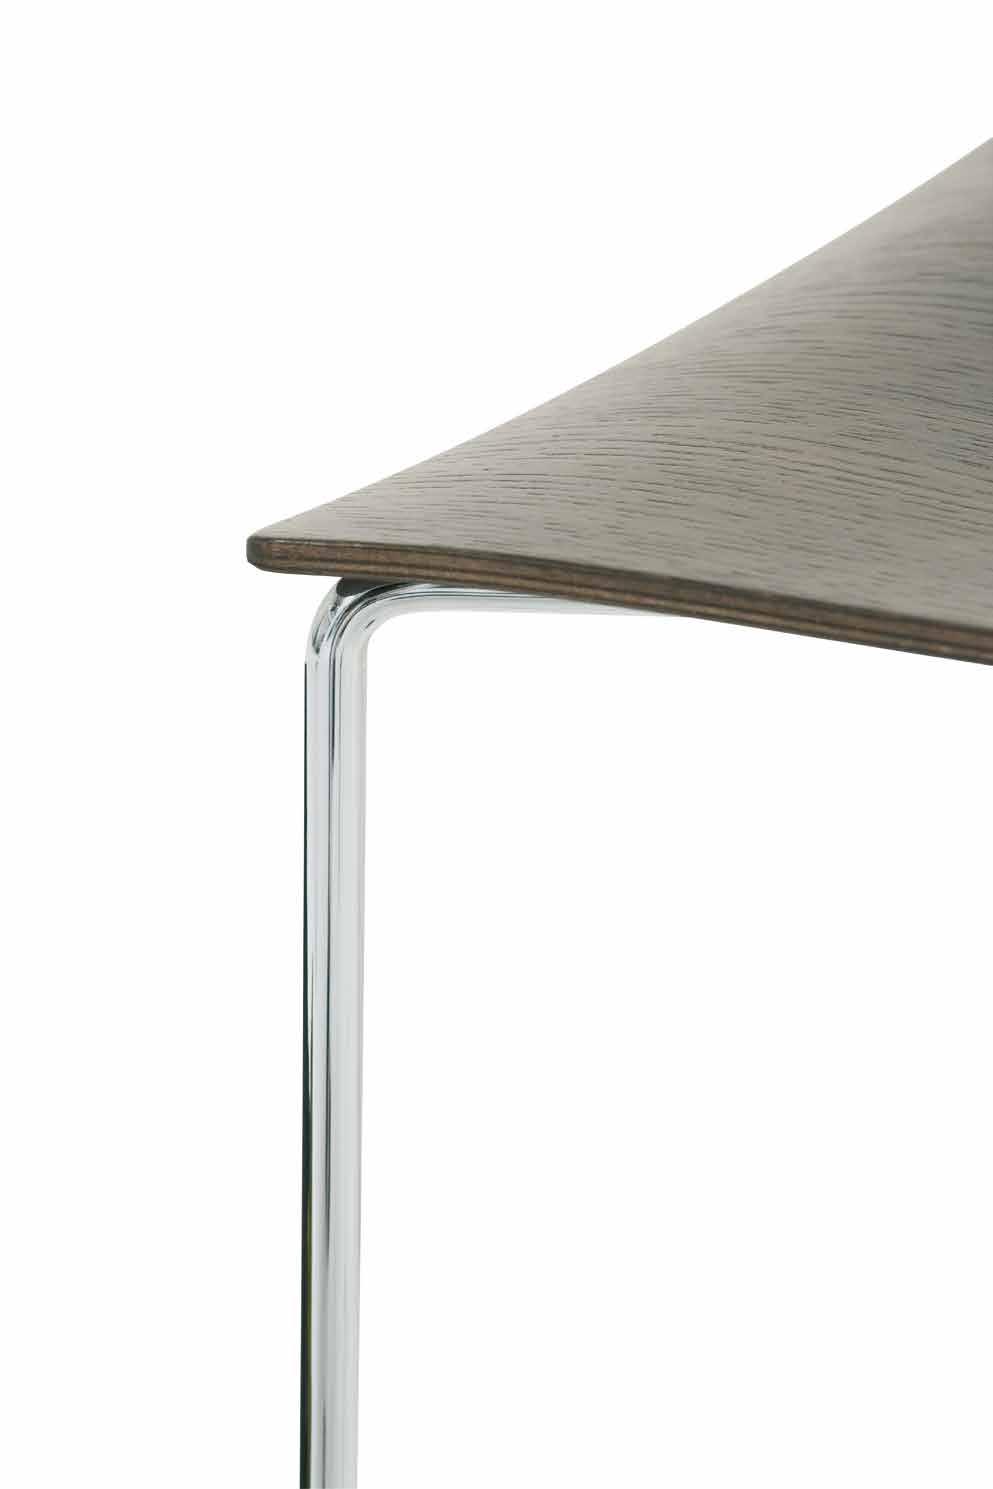 Version with swivel central base with self-return system or fixed central base with 4 wheels, with or without armrests, available in polished aluminum finish or aluminum colors.